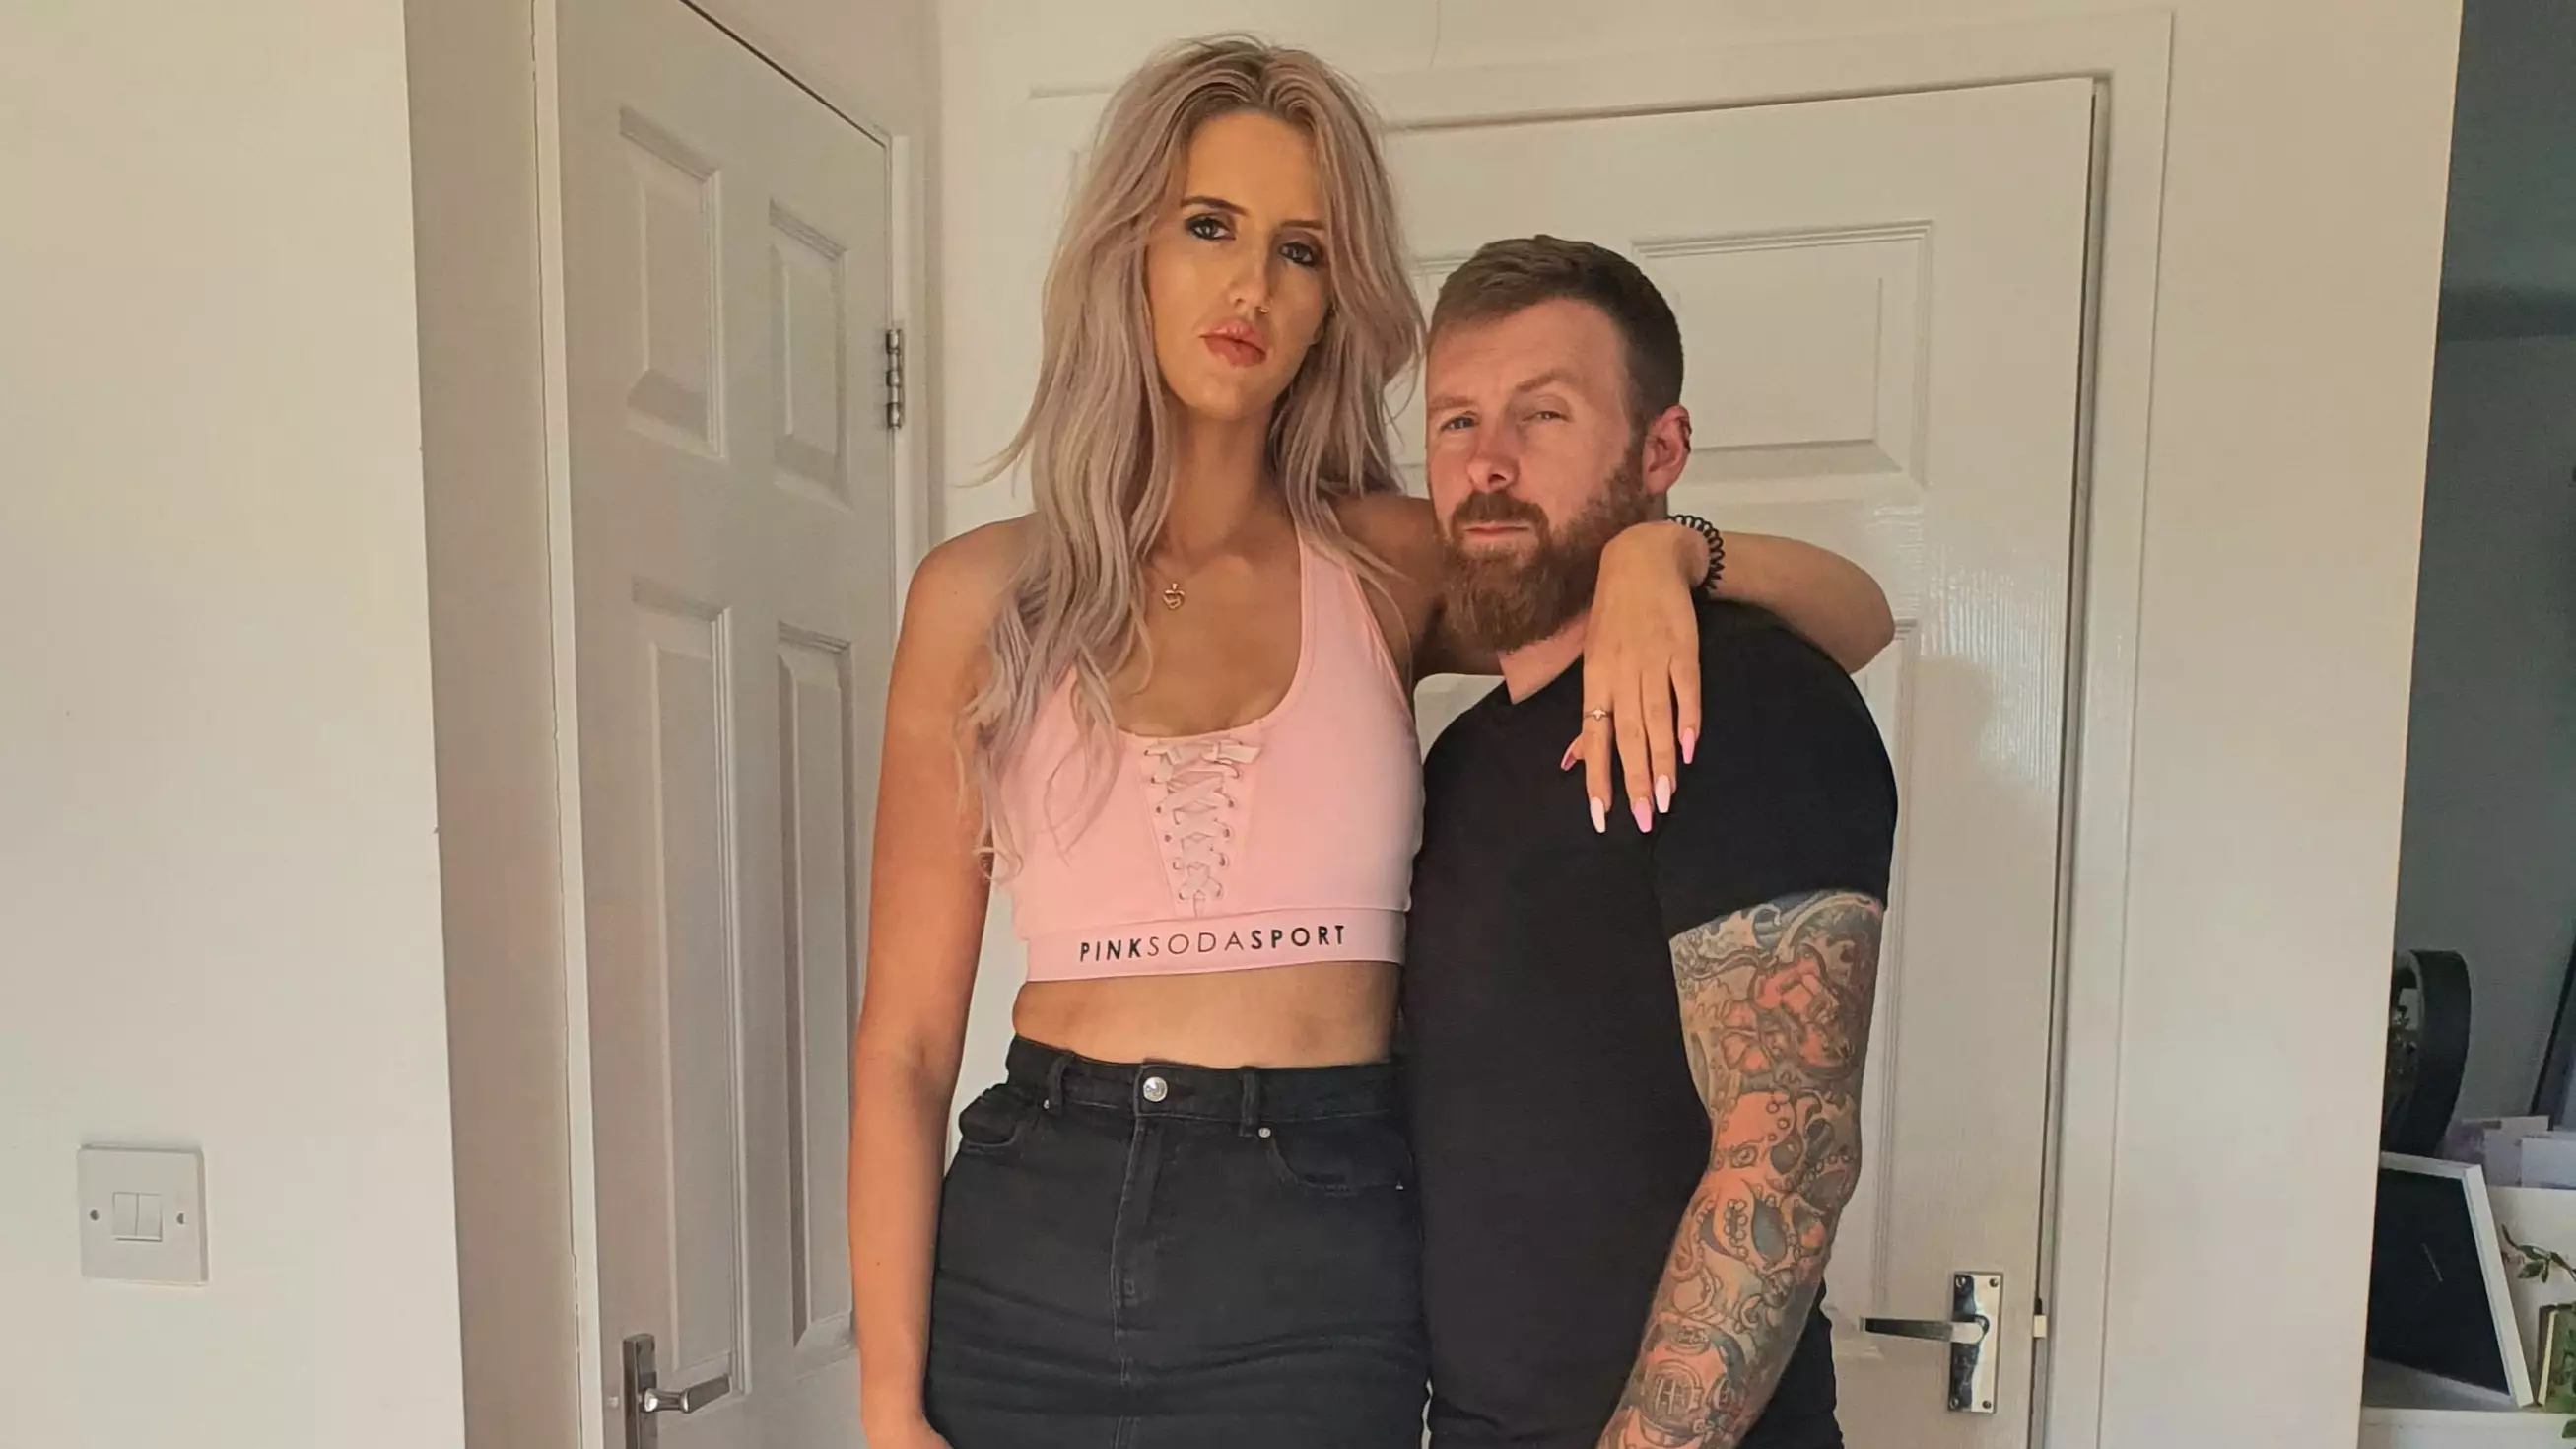 Man Says Height Difference With 6ft 3in Girlfriend Doesn't Bother Him